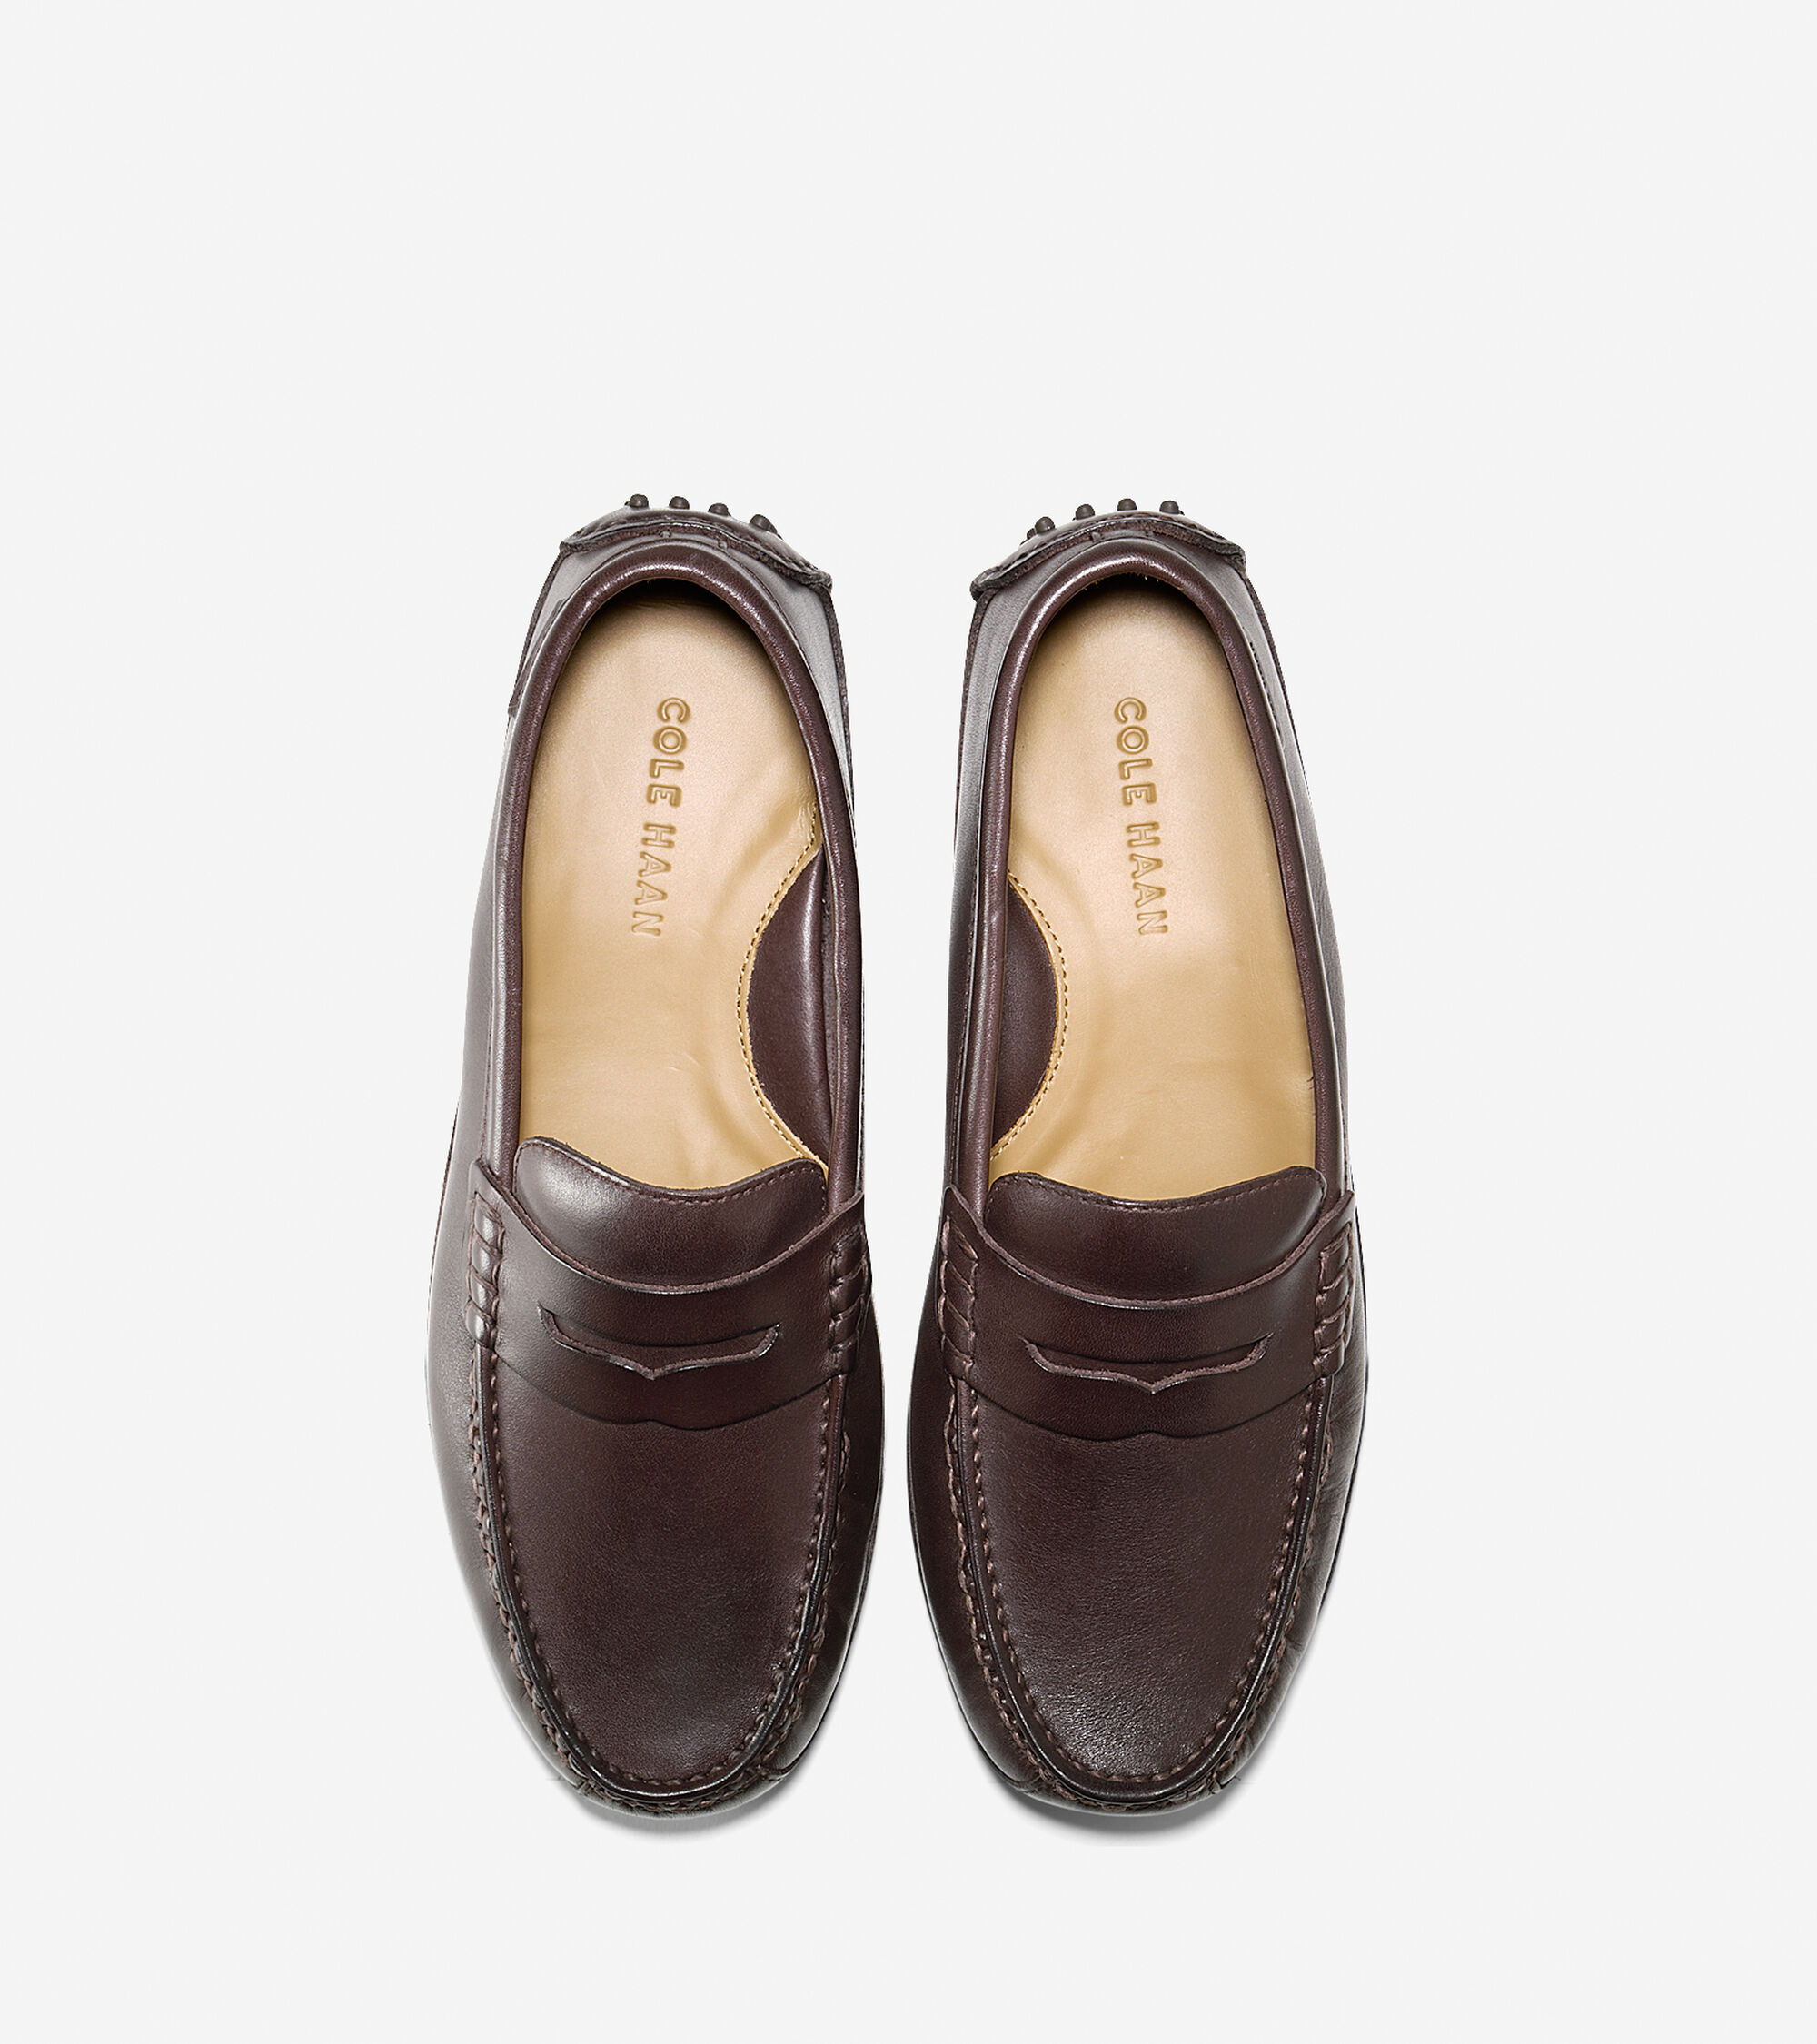 Grant Canoe Penny Loafers in T-Moro : Mens Shoes | Cole Haan